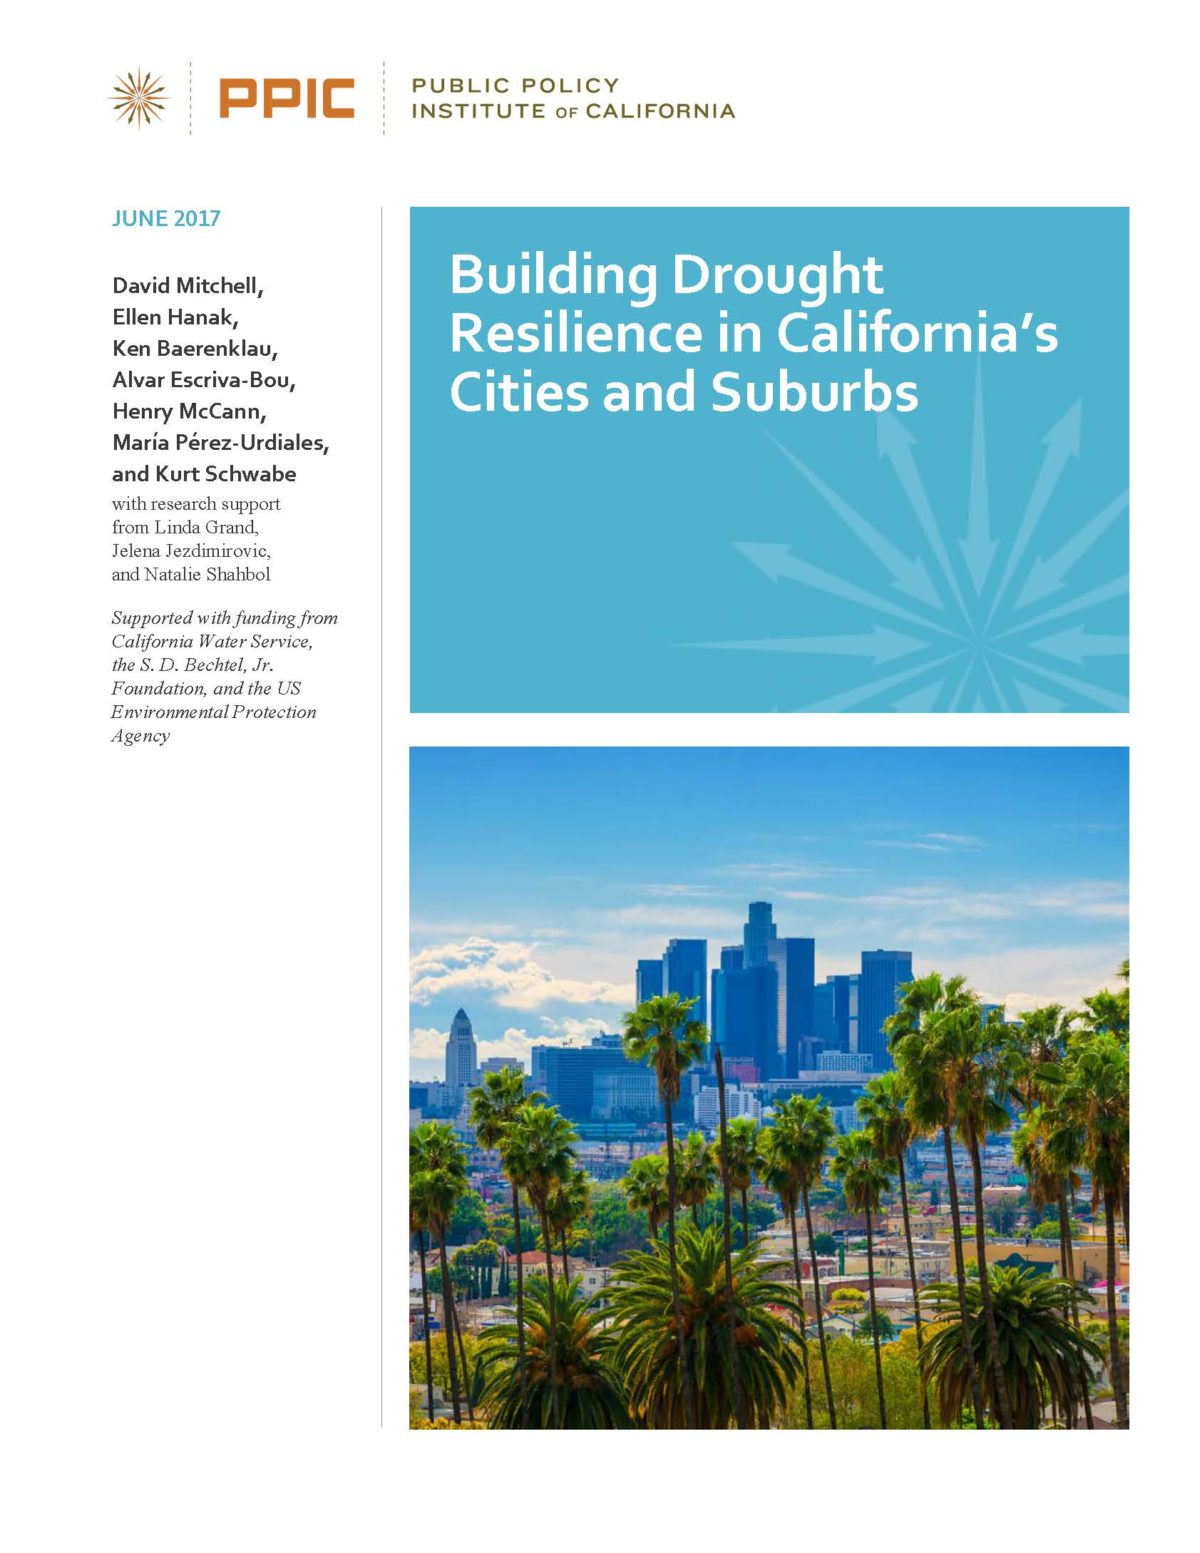 Building Drought Resilience in California’s Cities and Suburbs